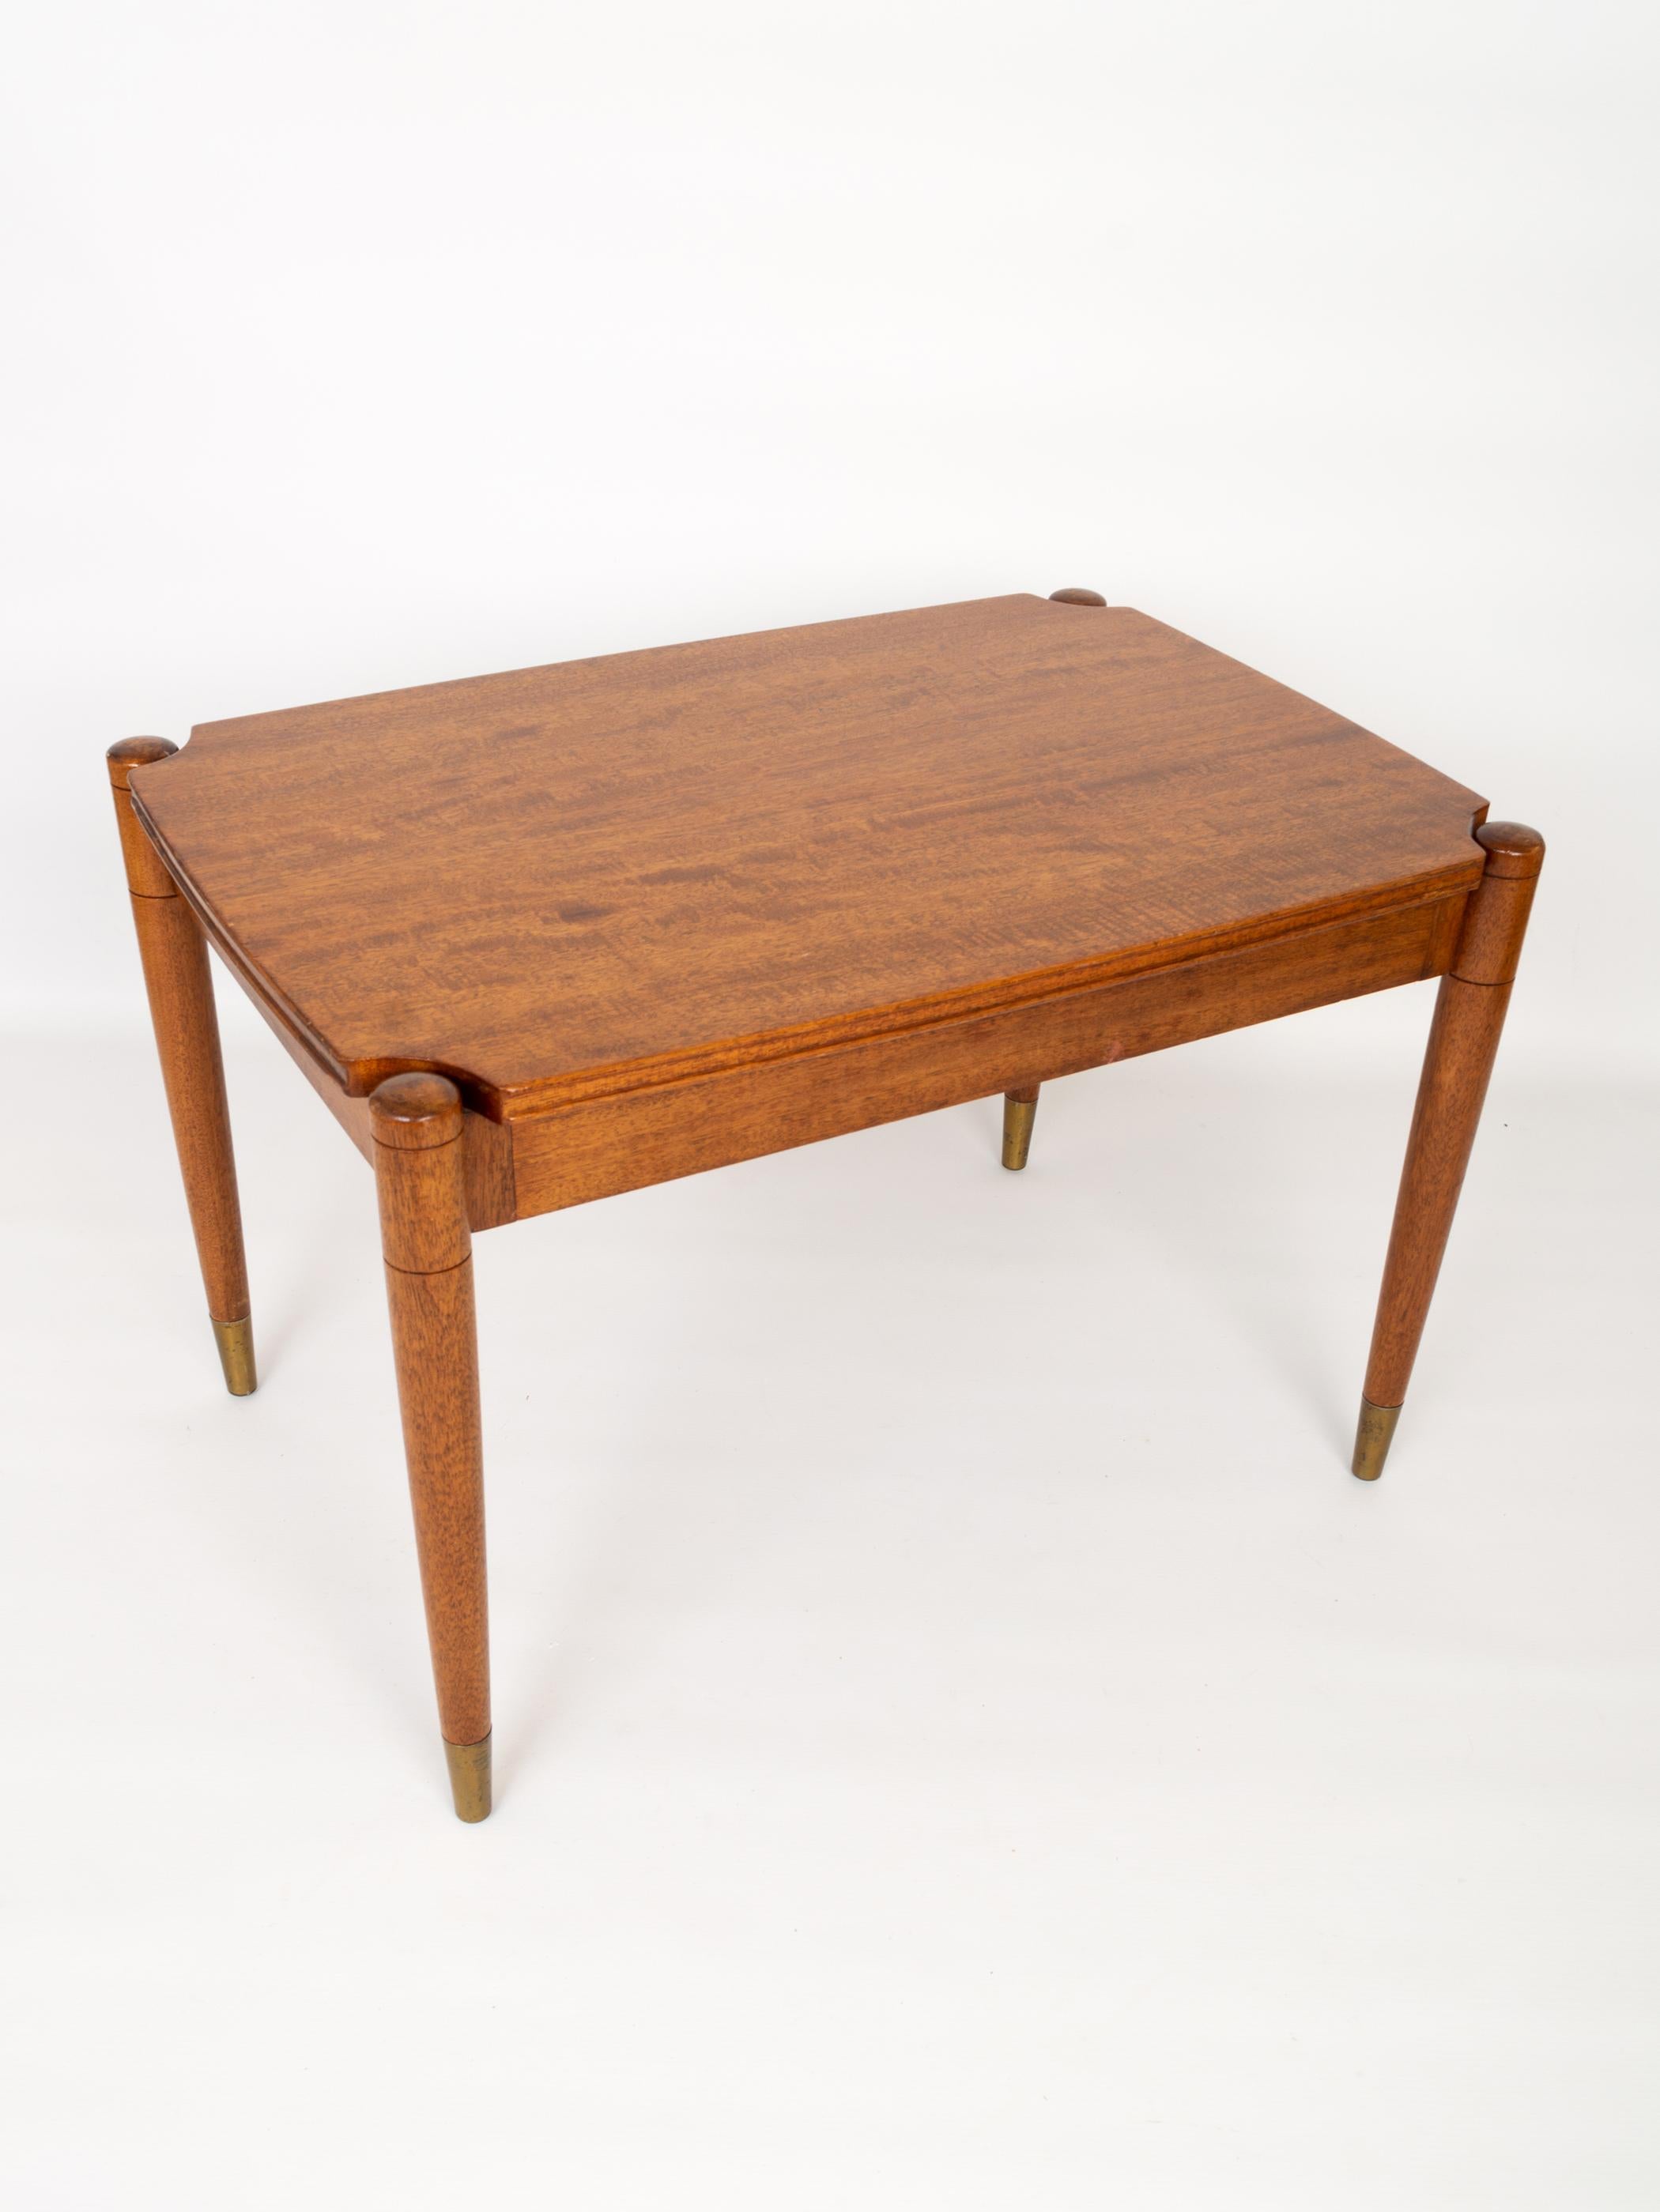 A mid century teak coffee table with brass feet, England C.1960.

In excellent vintage condition.